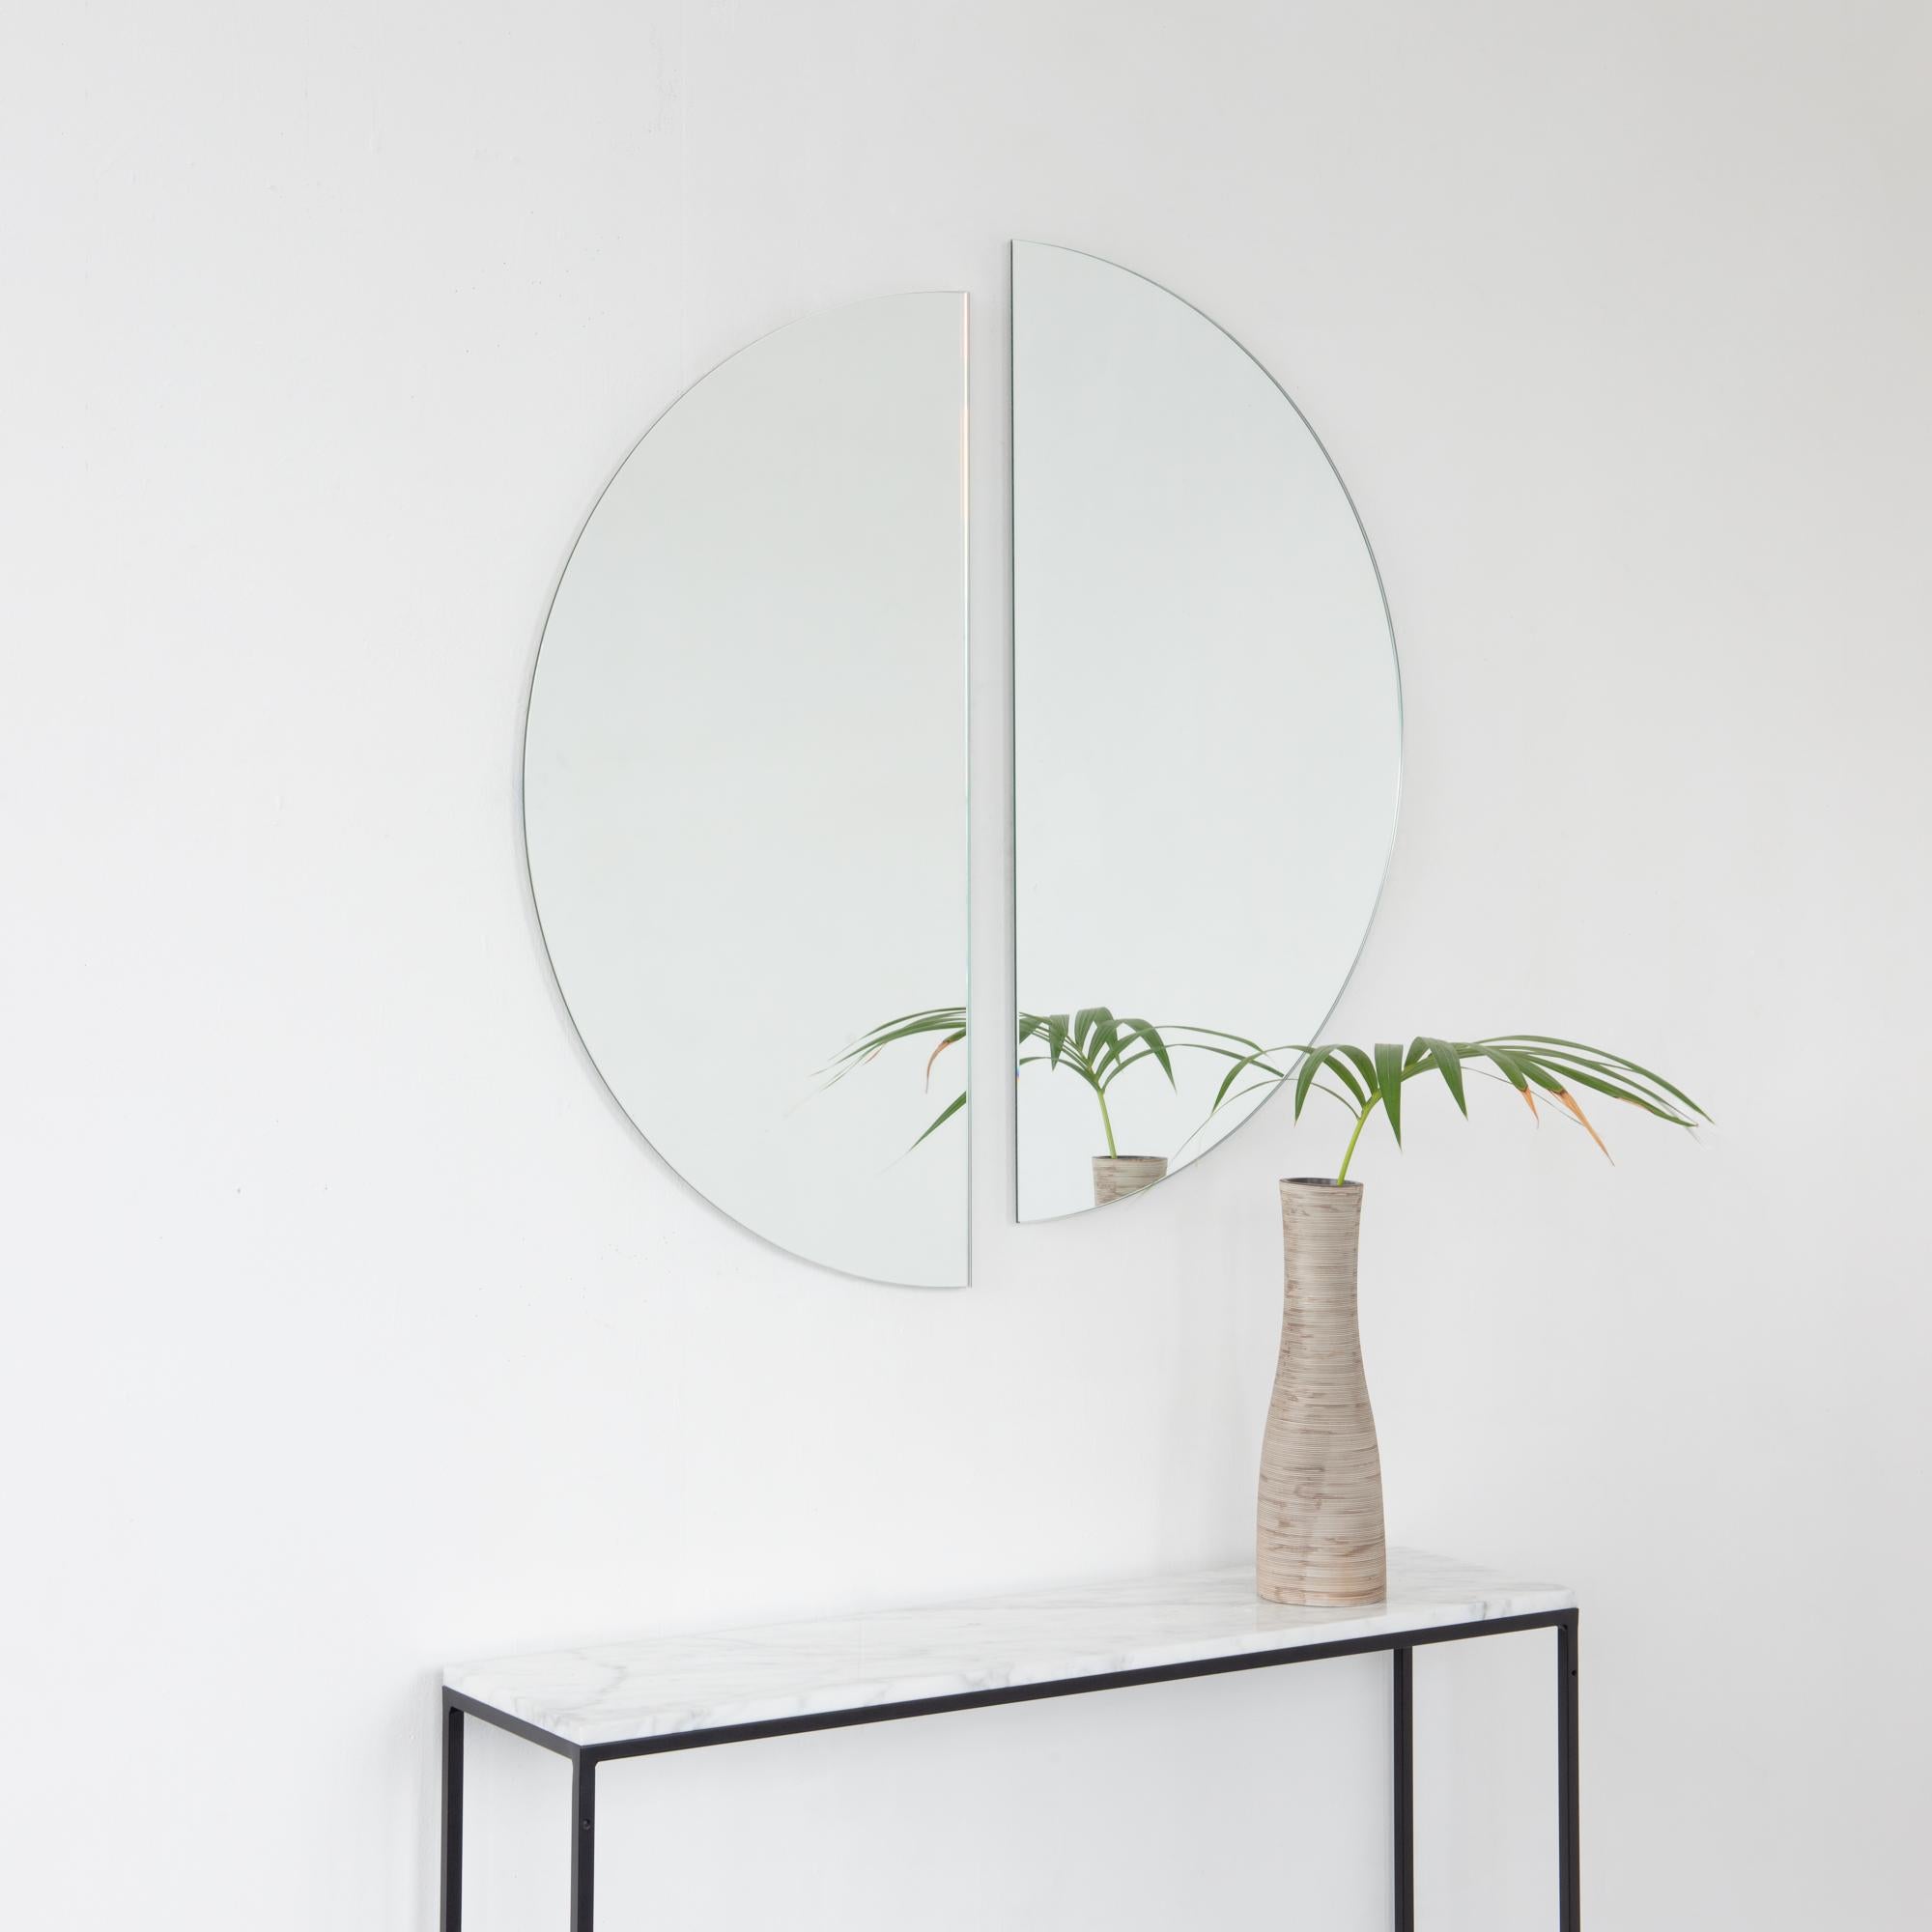 Set of two charming and minimalist Luna™ half-moon frameless mirrors with a floating effect. Fitted with a quality hanging system for a flexible installation in 4 different positions. Designed and made in London, UK.

Our mirrors are designed with